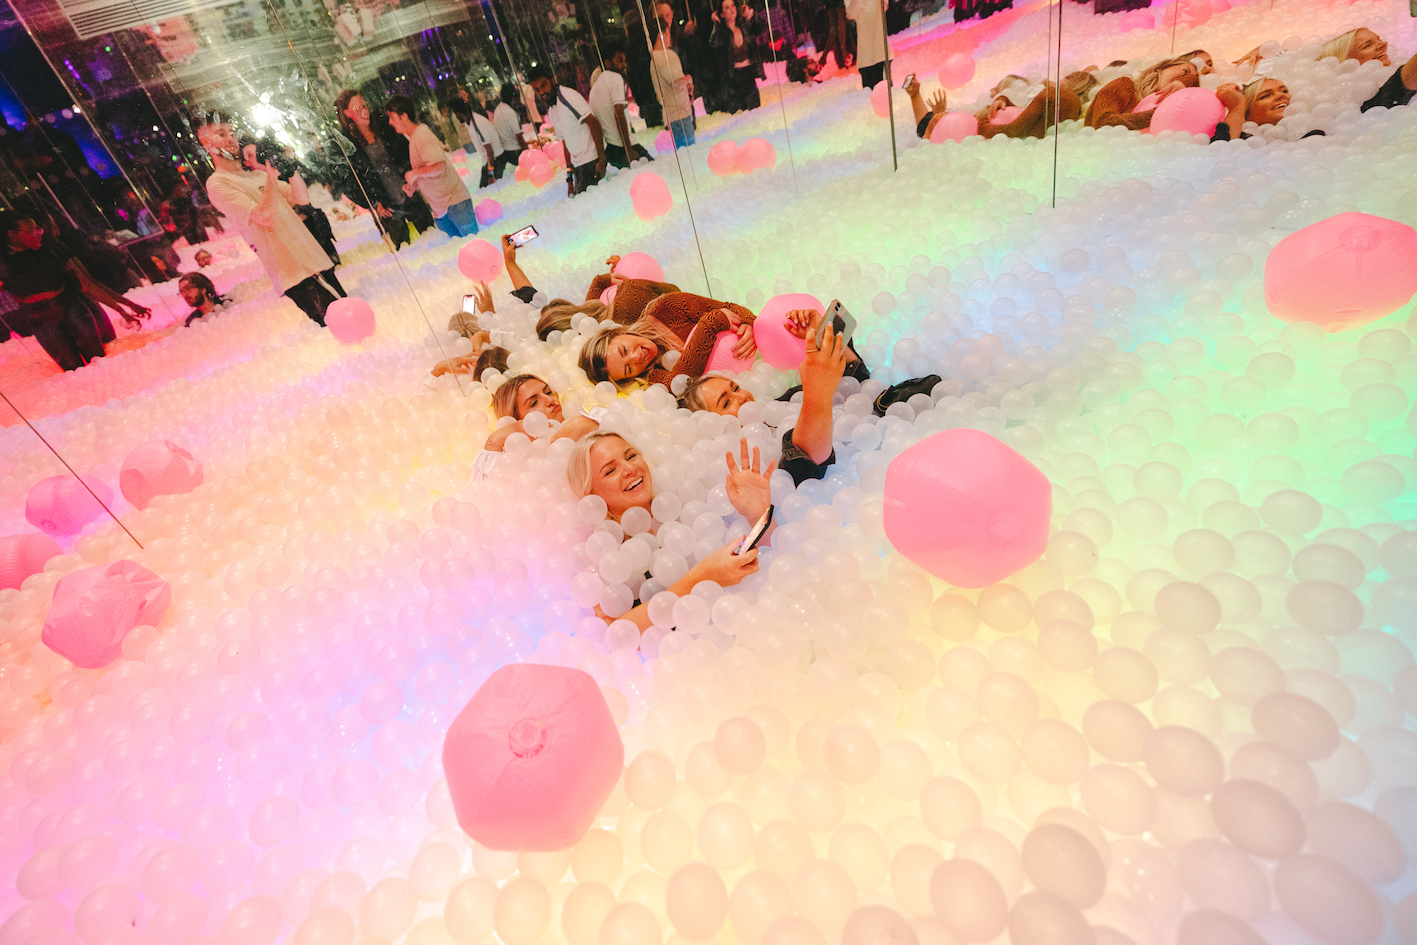 a group of women playing in a ball pit with giant pink inflatables around them